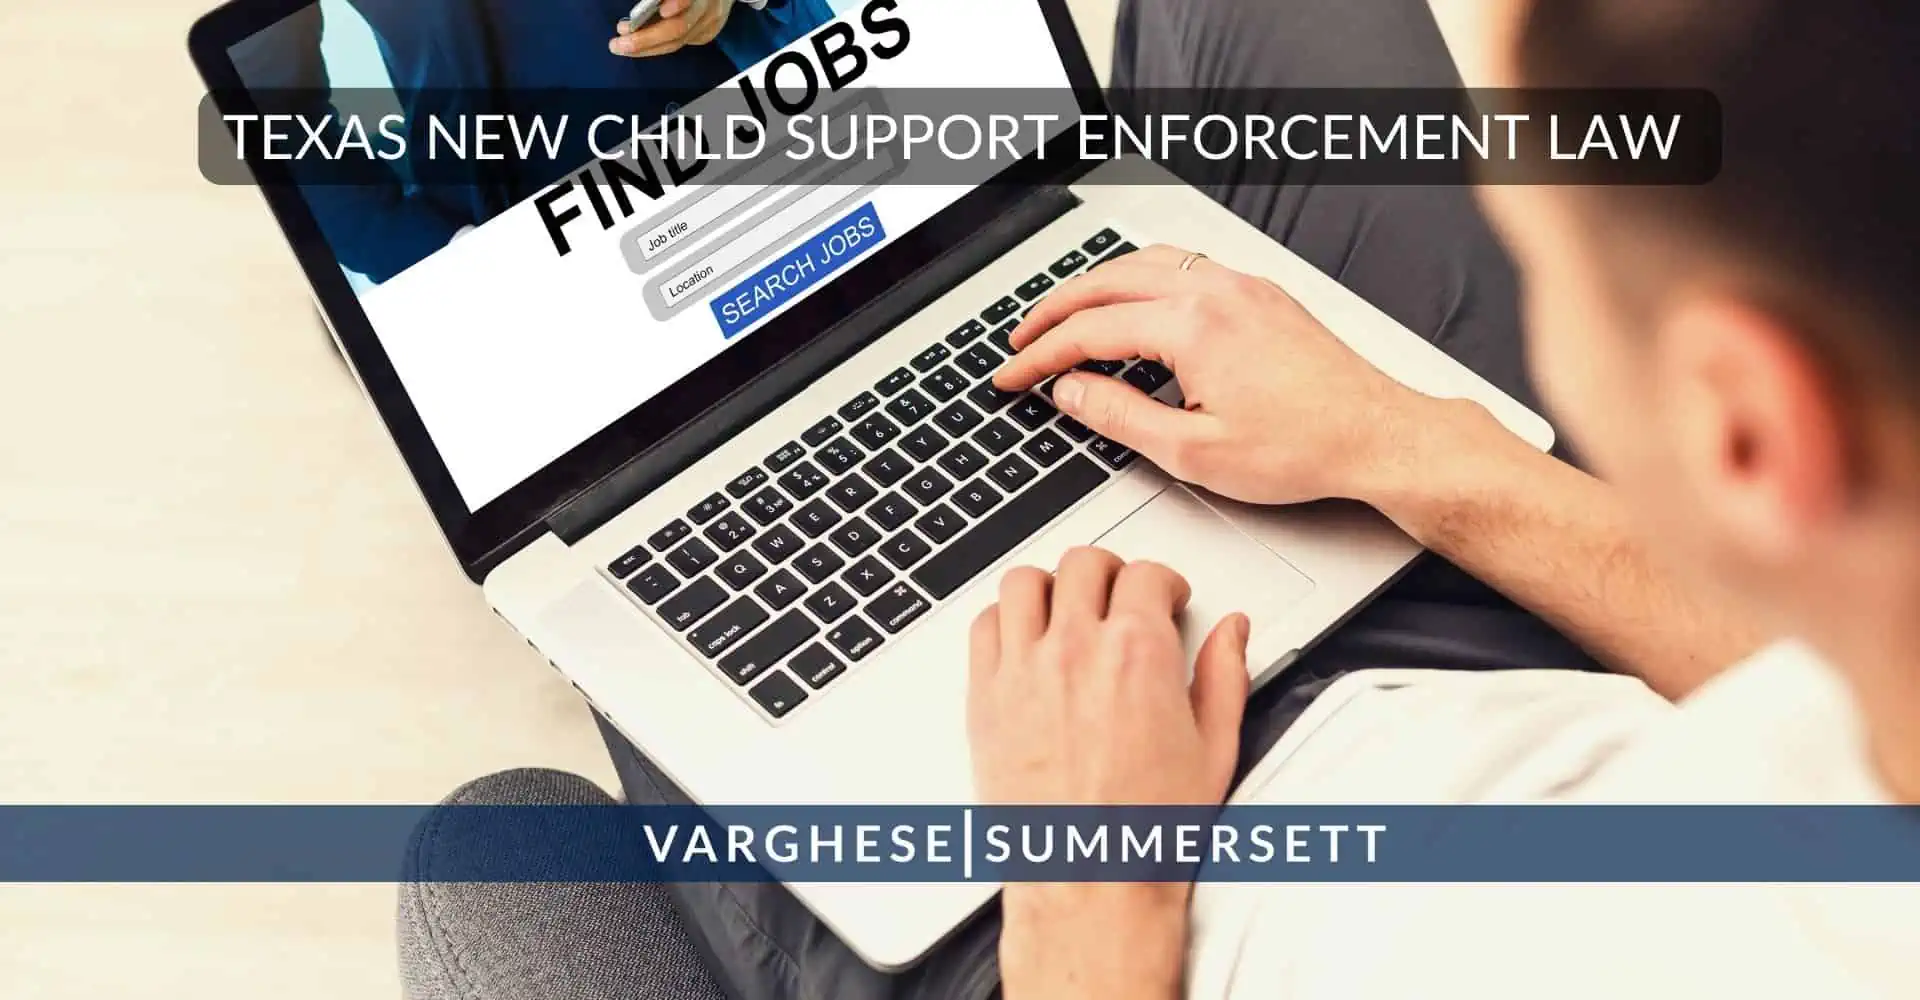 Texas New Child Support Law